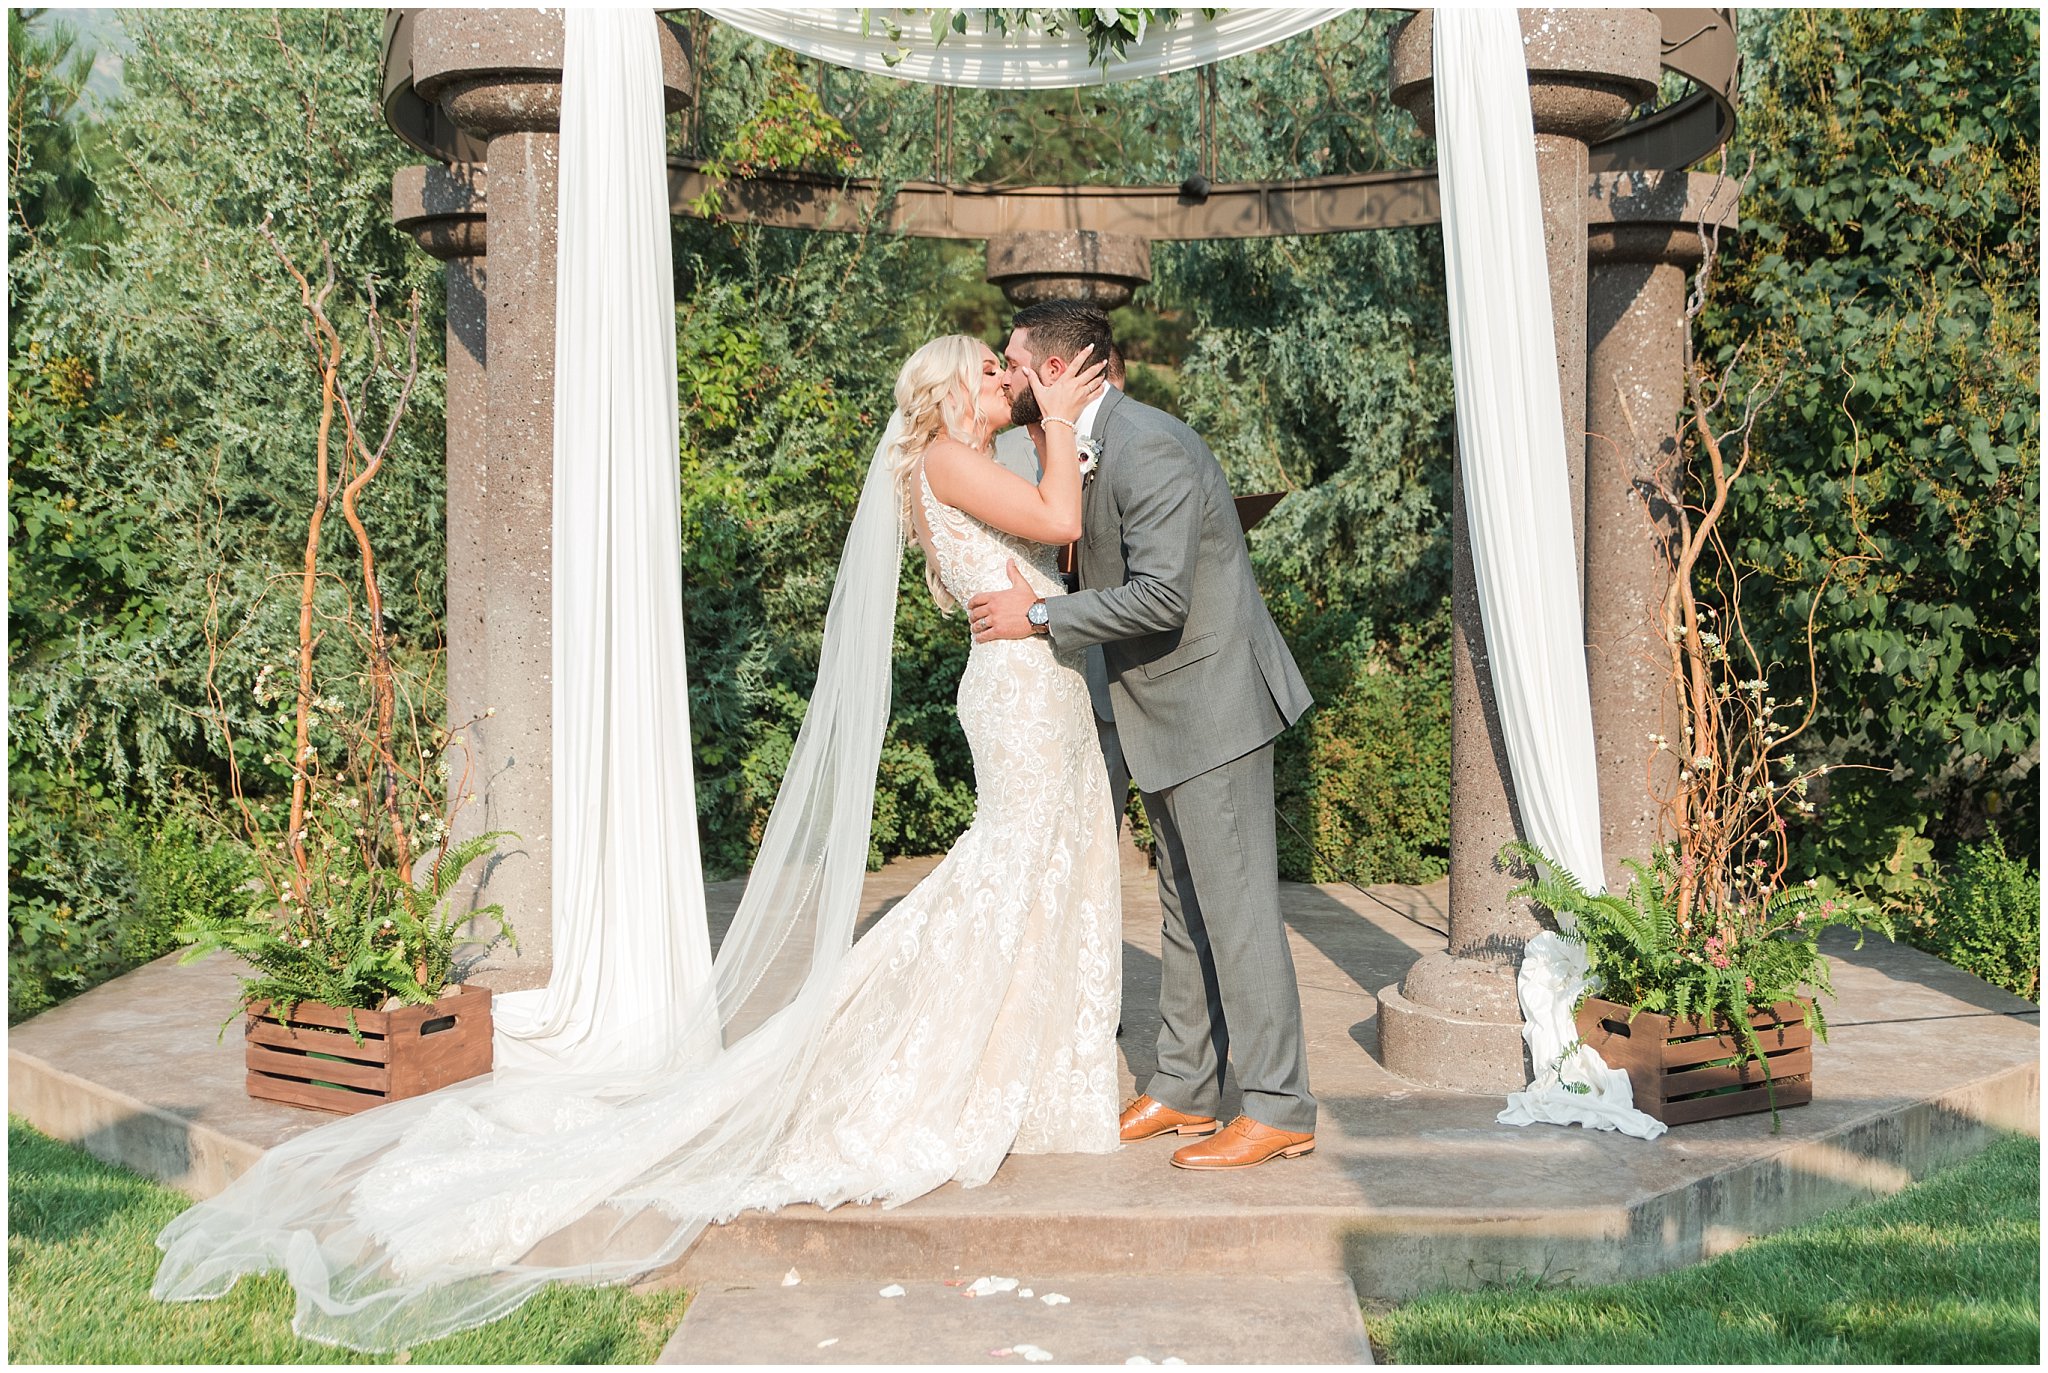 First kiss during wedding ceremony | Dusty Blue and Rose Summer Wedding at Oak Hills Utah | Jessie and Dallin Photography